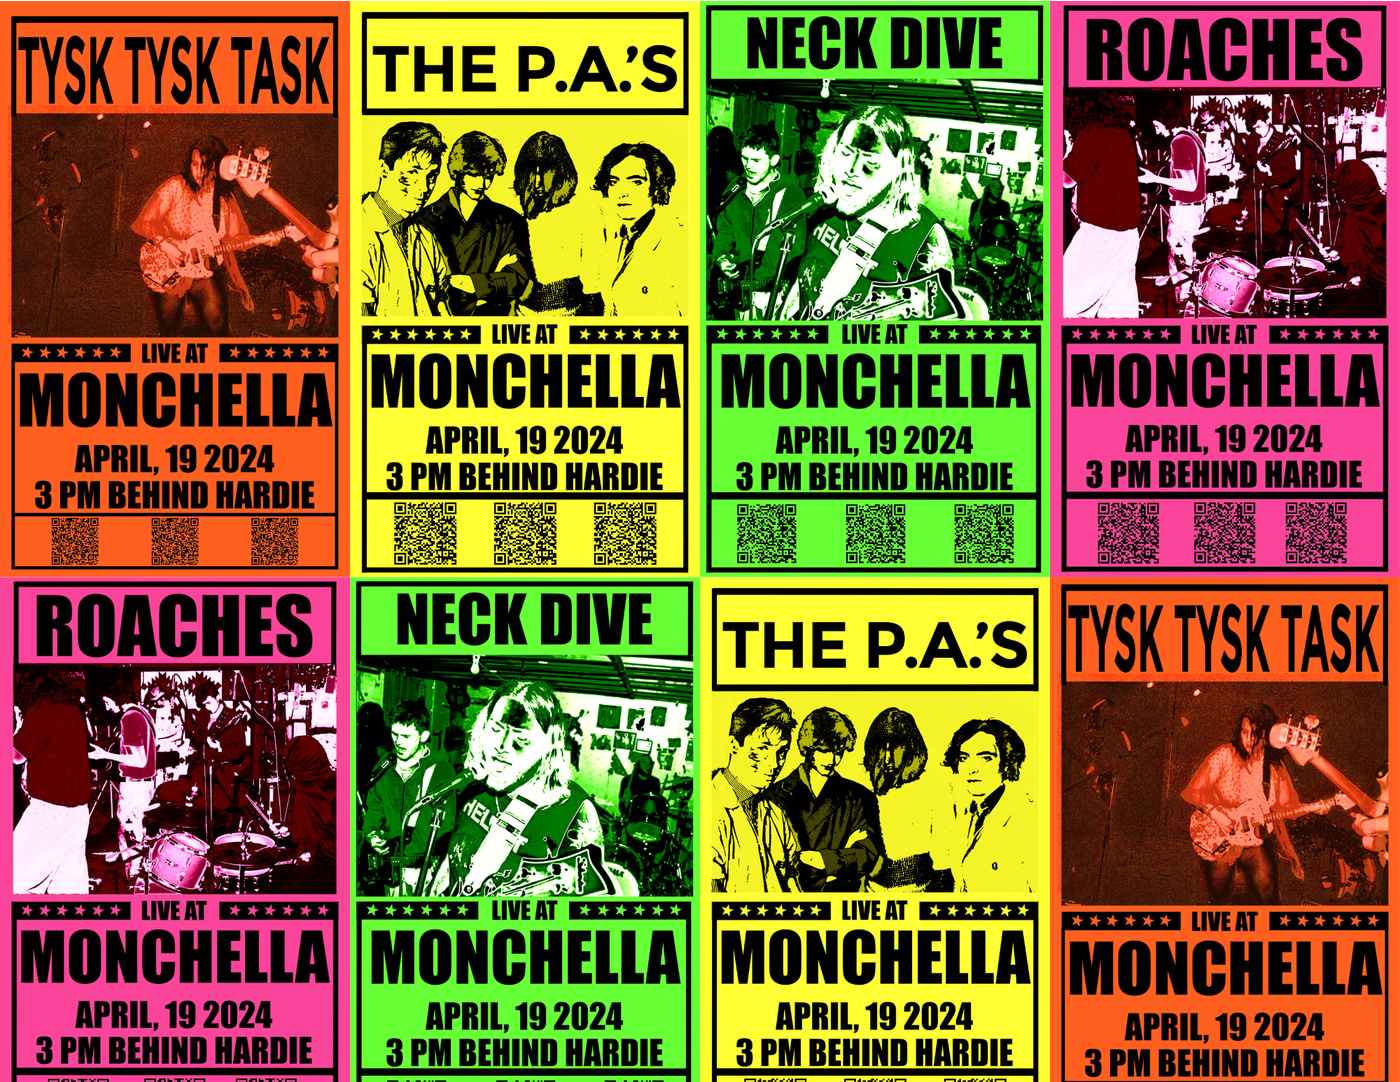 Check out these eight vivid and colorful retro concert posters. They feature different bands performing at "Monchella" on April 19, 1924. The posters stand out with their unique pink, green, and yellow backgrounds.